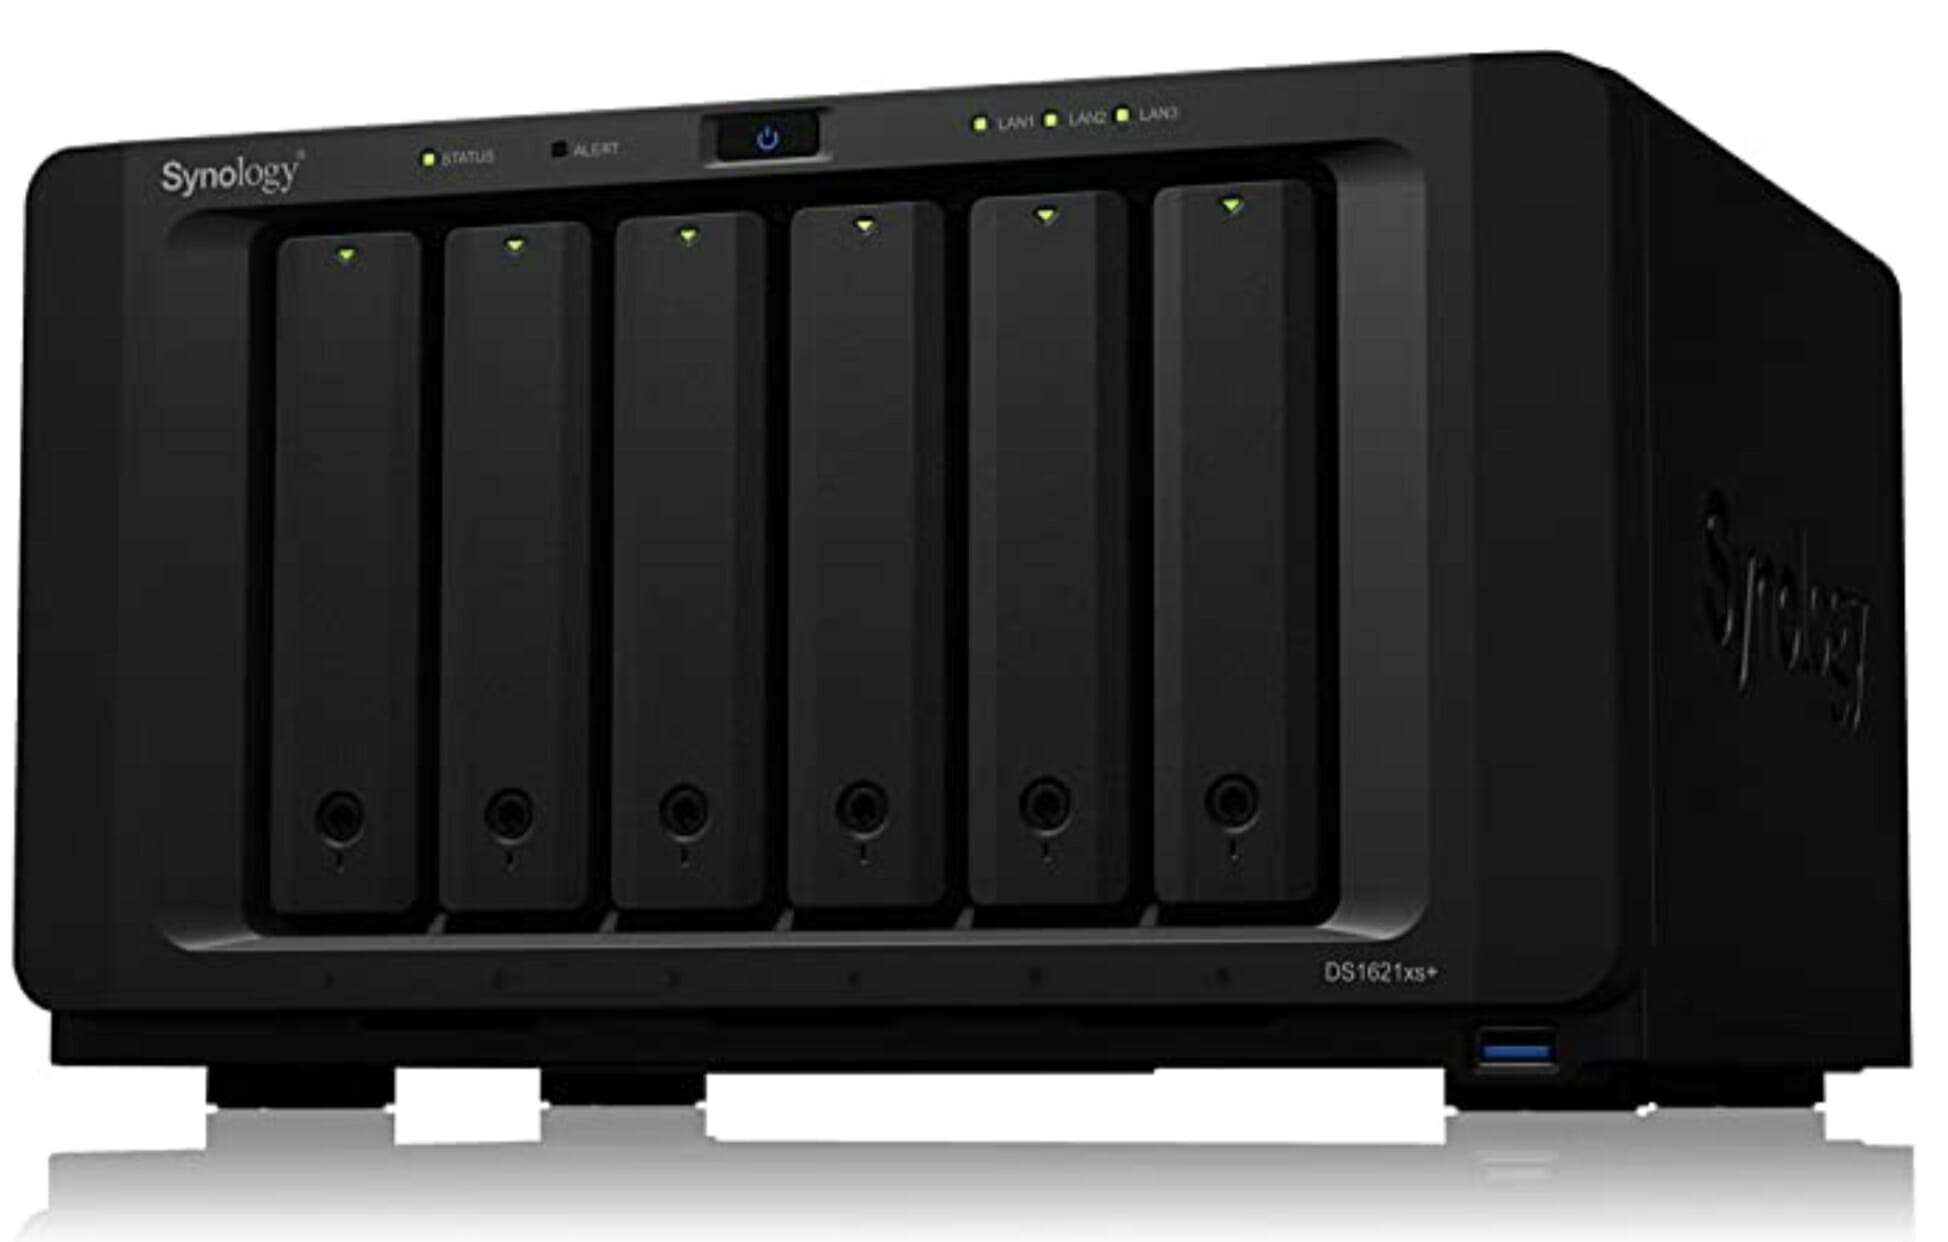 DS1621ns+ Synology